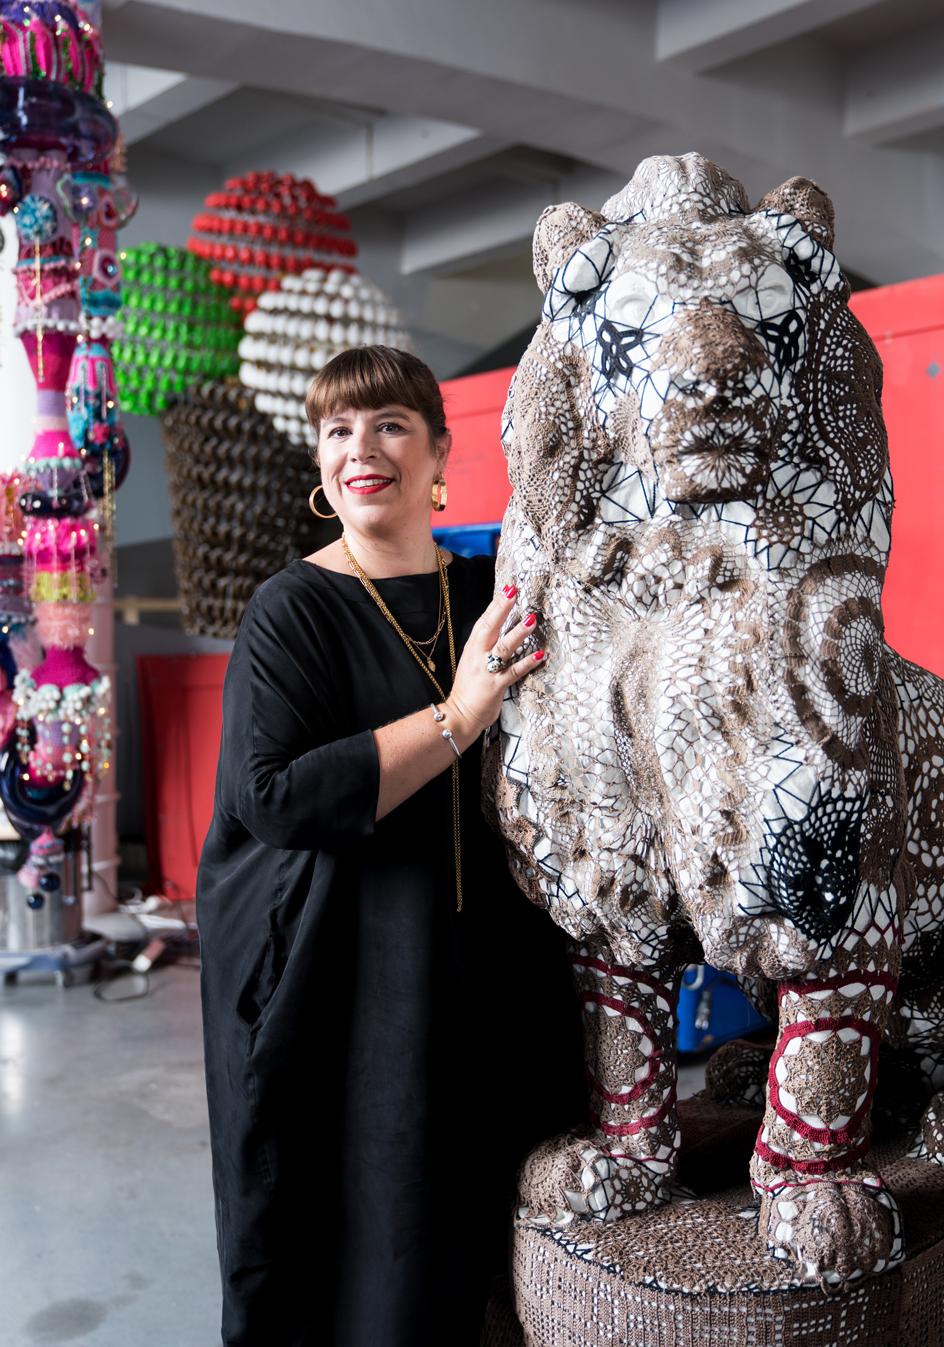 You are currently viewing Joana Vasconcelos – Wedding in the cake